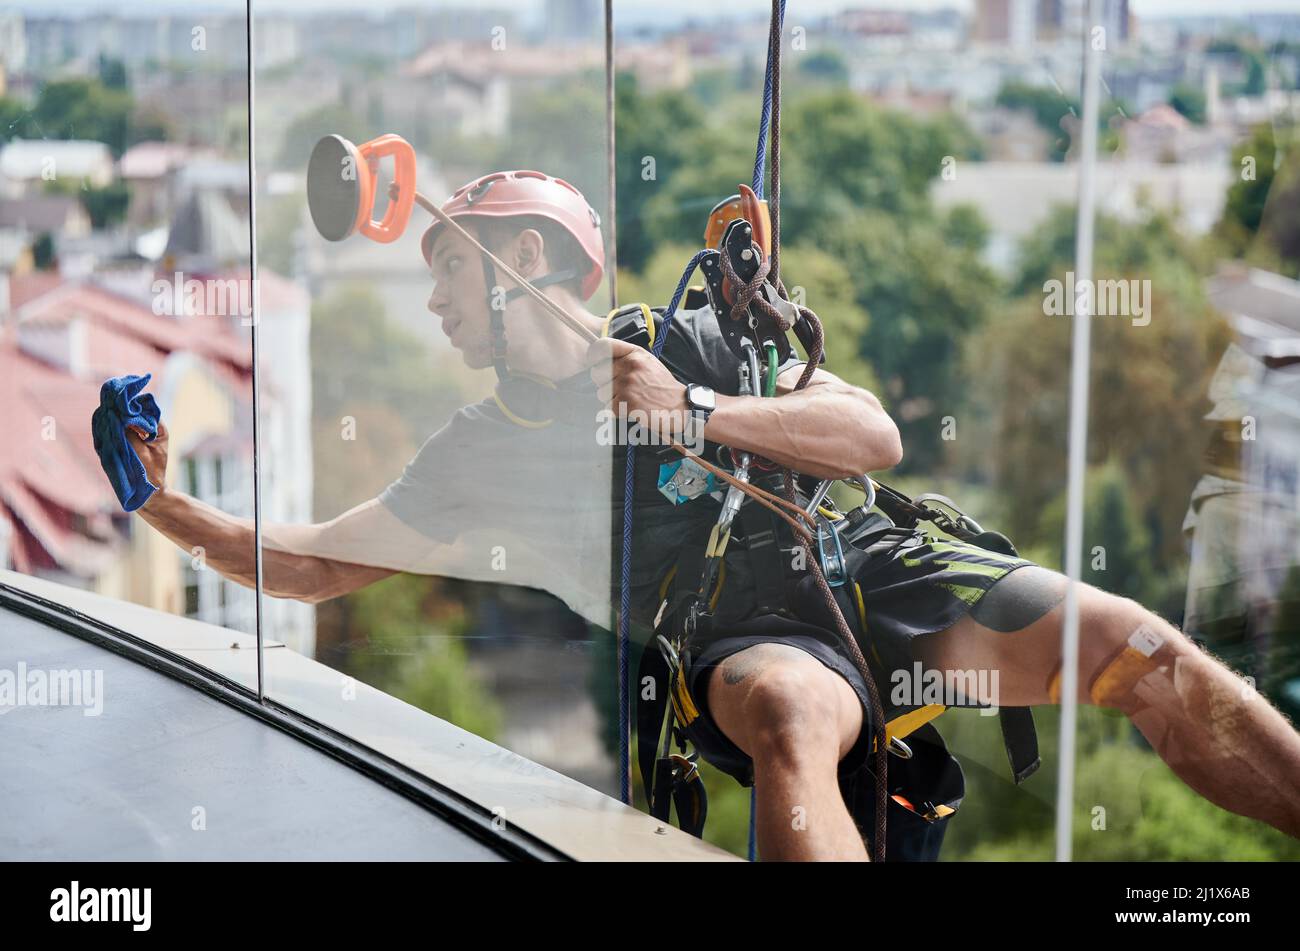 Industrial mountaineering cleaning service worker hanging on rope and wiping window. View from inside building. Cleaner using safety lifting equipment while cleaning glass of high-rise building. Stock Photo